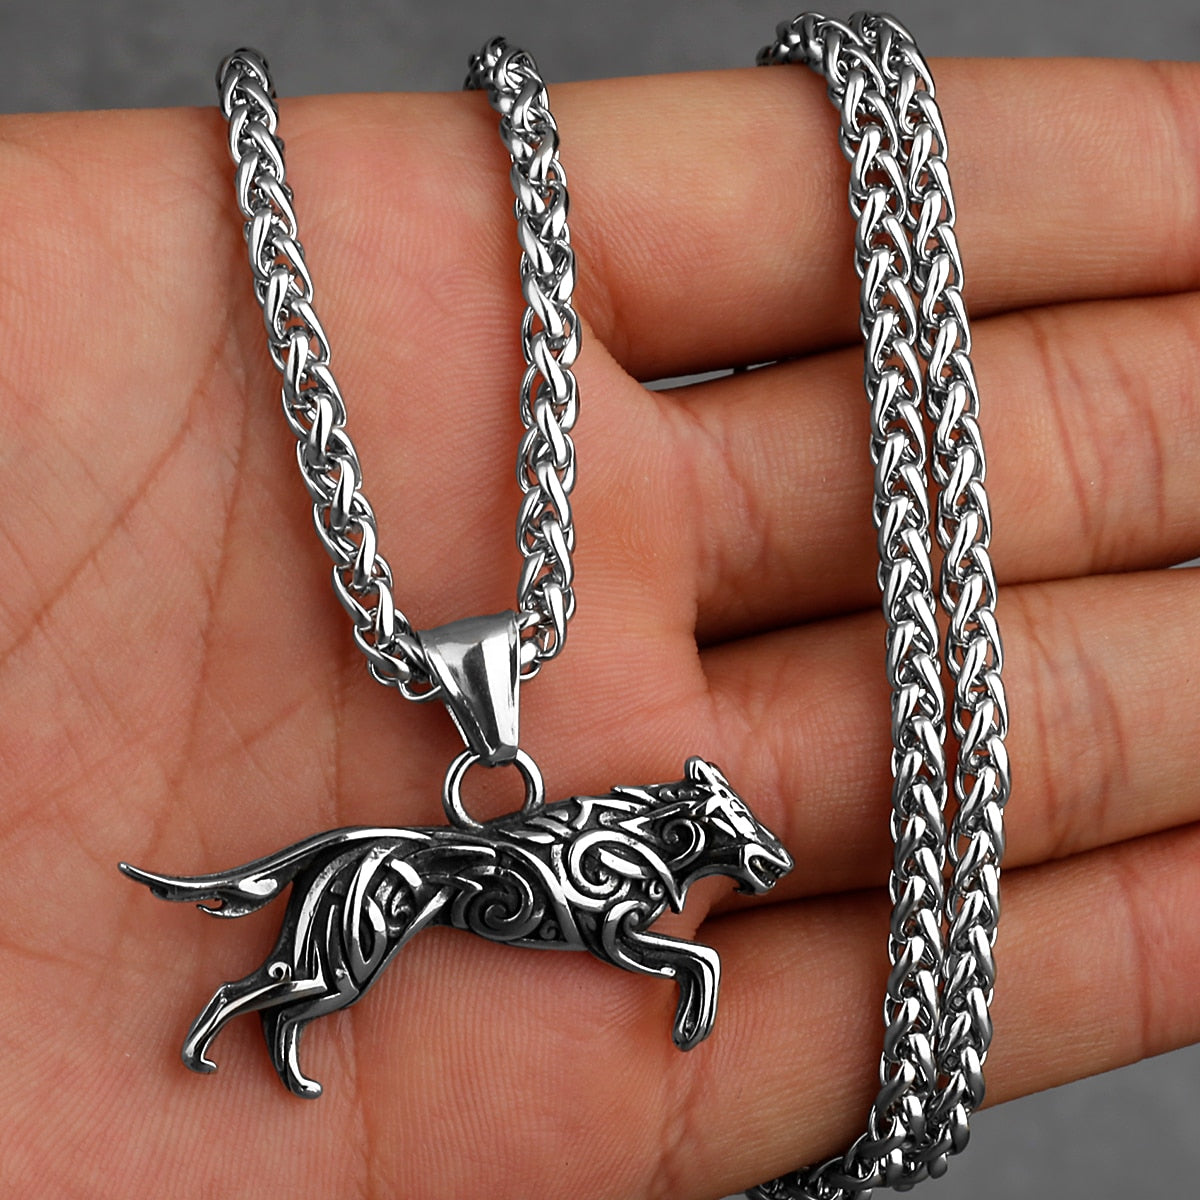 Amazing Wolf Stainless Steel Necklace